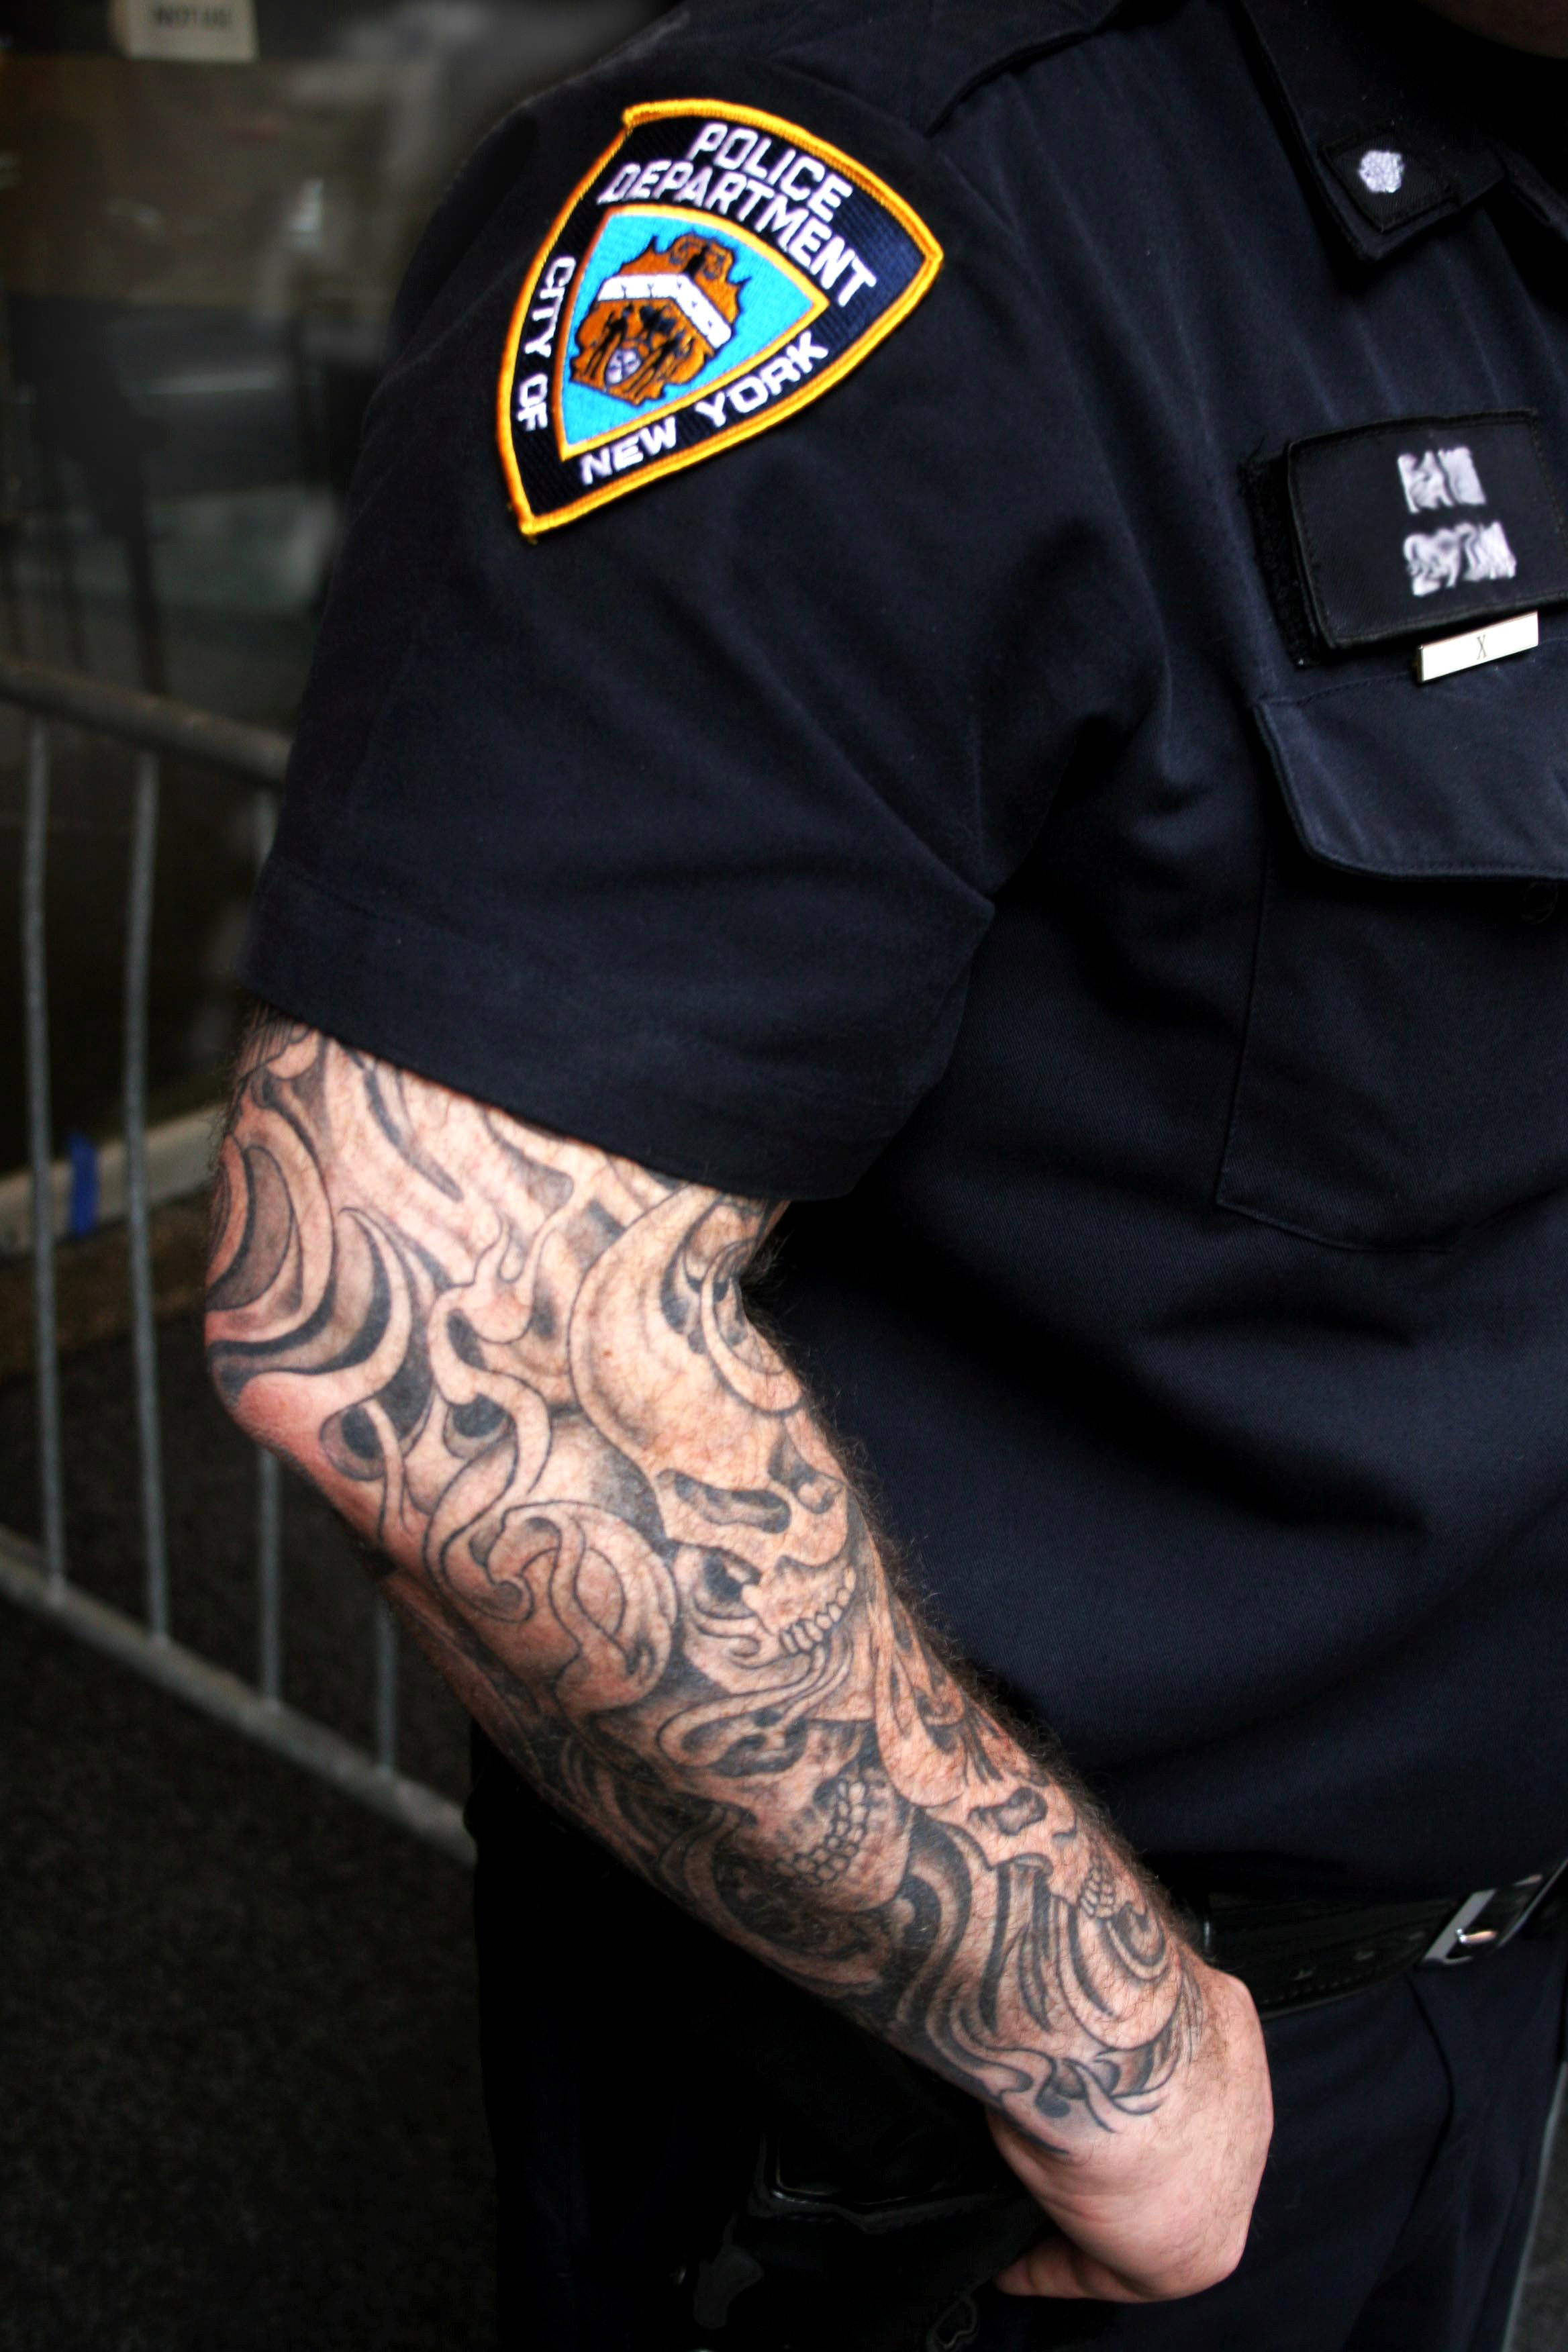 Top more than 71 tattoos law enforcement best  thtantai2